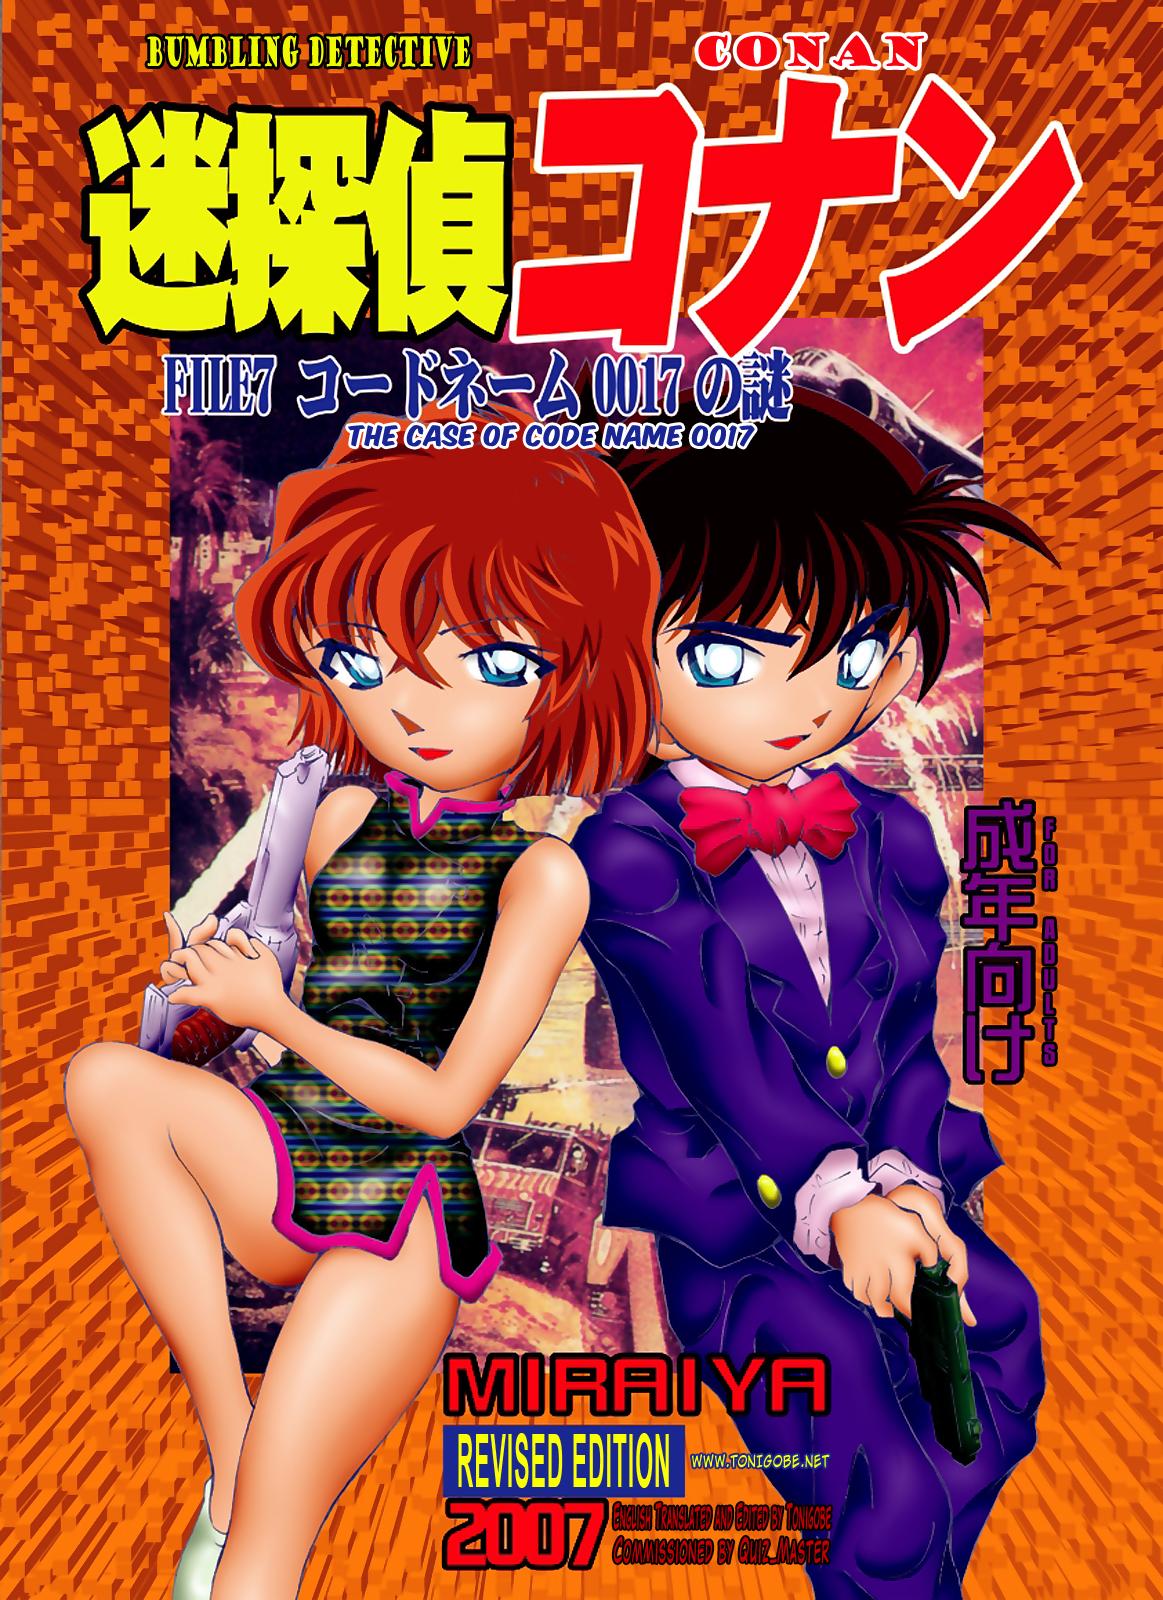 Scandal Bumbling Detective Conan - File 7: The Case of Code Name 0017 - Detective conan French Porn - Picture 1